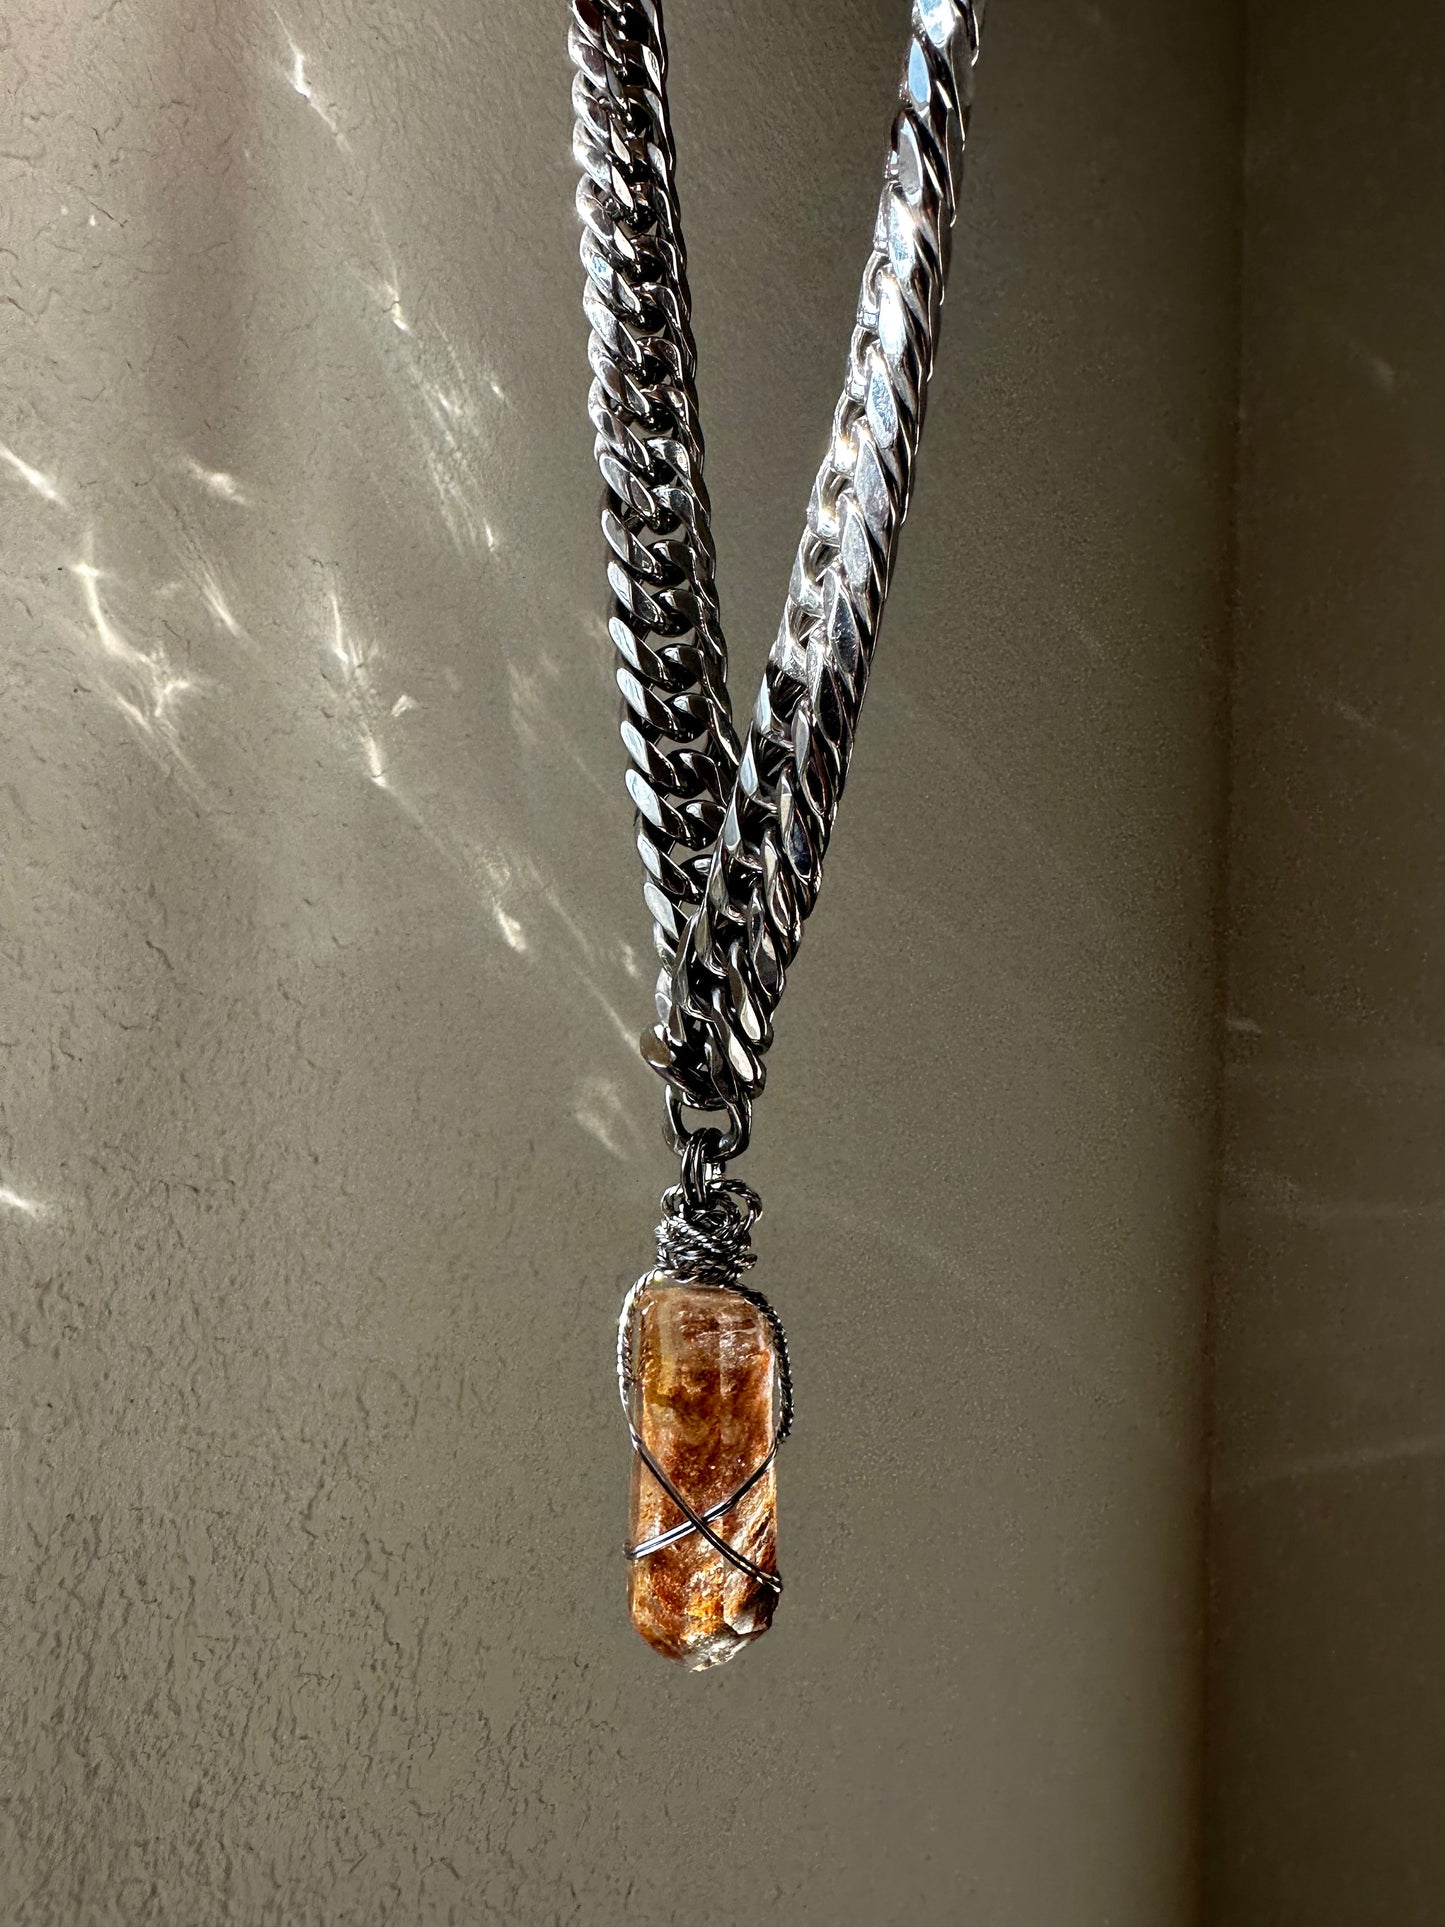 'Claim Your Power' Lodolite Point with Rust Colored Inclusions Super Chonk Stainless Steel Cuban Chain Necklace (16mm Thick)